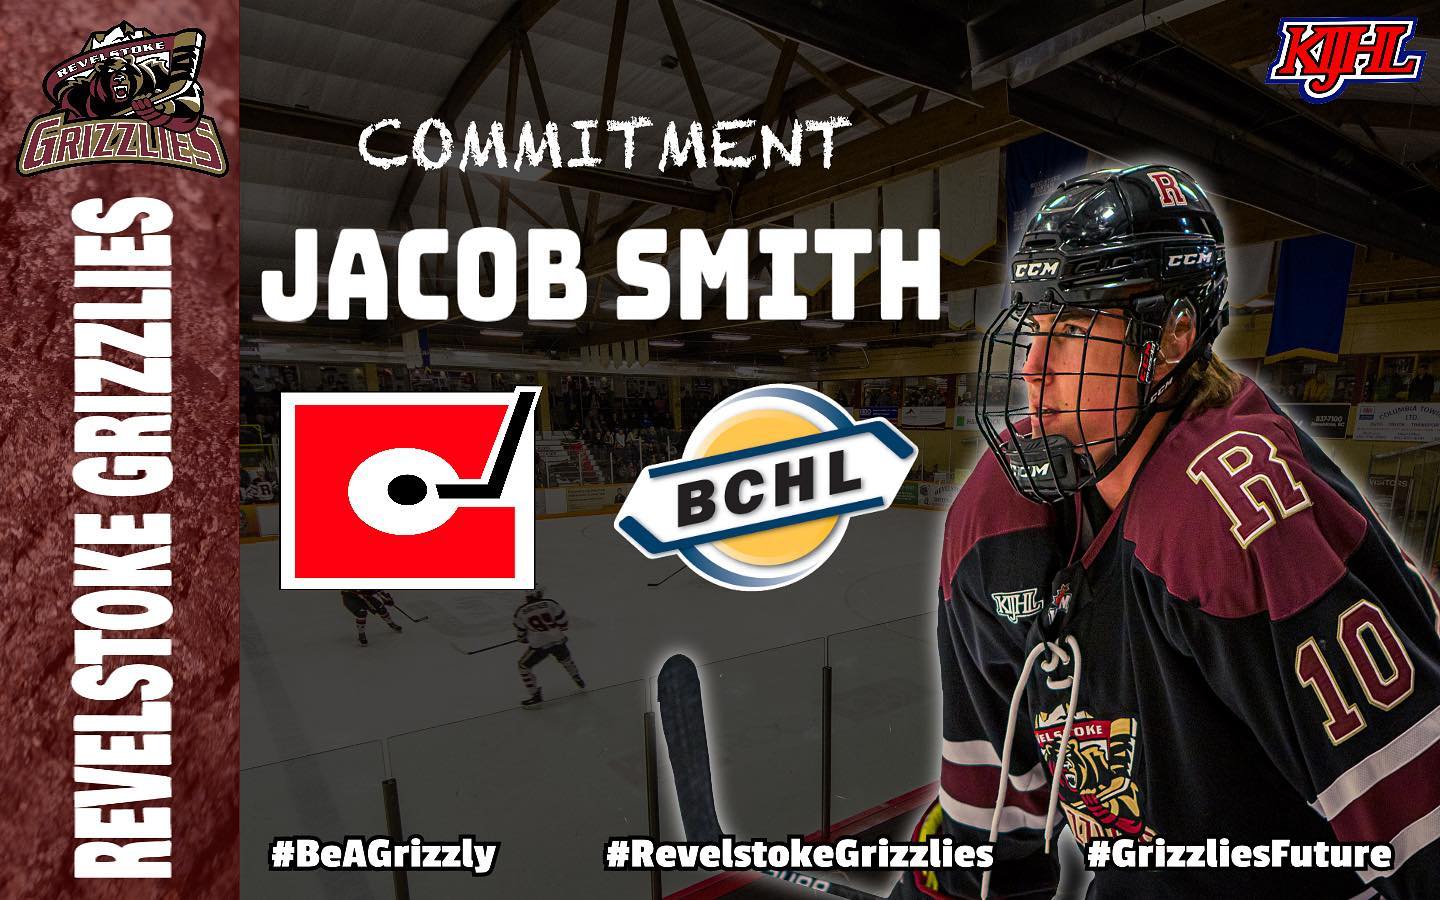 🚨COMMITMENT ALERT🚨

HUGE CONGRATULATIONS to #10 Jacob Smith ( @jacobsmithh9 ) on your commitment to the Merritt Centennials ( @bchlcentennials ) of the BCHL for the 2022-23 season!

Way to go Smitty!!! We are all proud of you 👏 

( 📸 : @timminsphotos )

#RevelstokeGrizzlies #GoGrizzlies #KIJHL #MerrittCentennials #BCHL #BeAGrizzly #PlayLikeAGrizzly